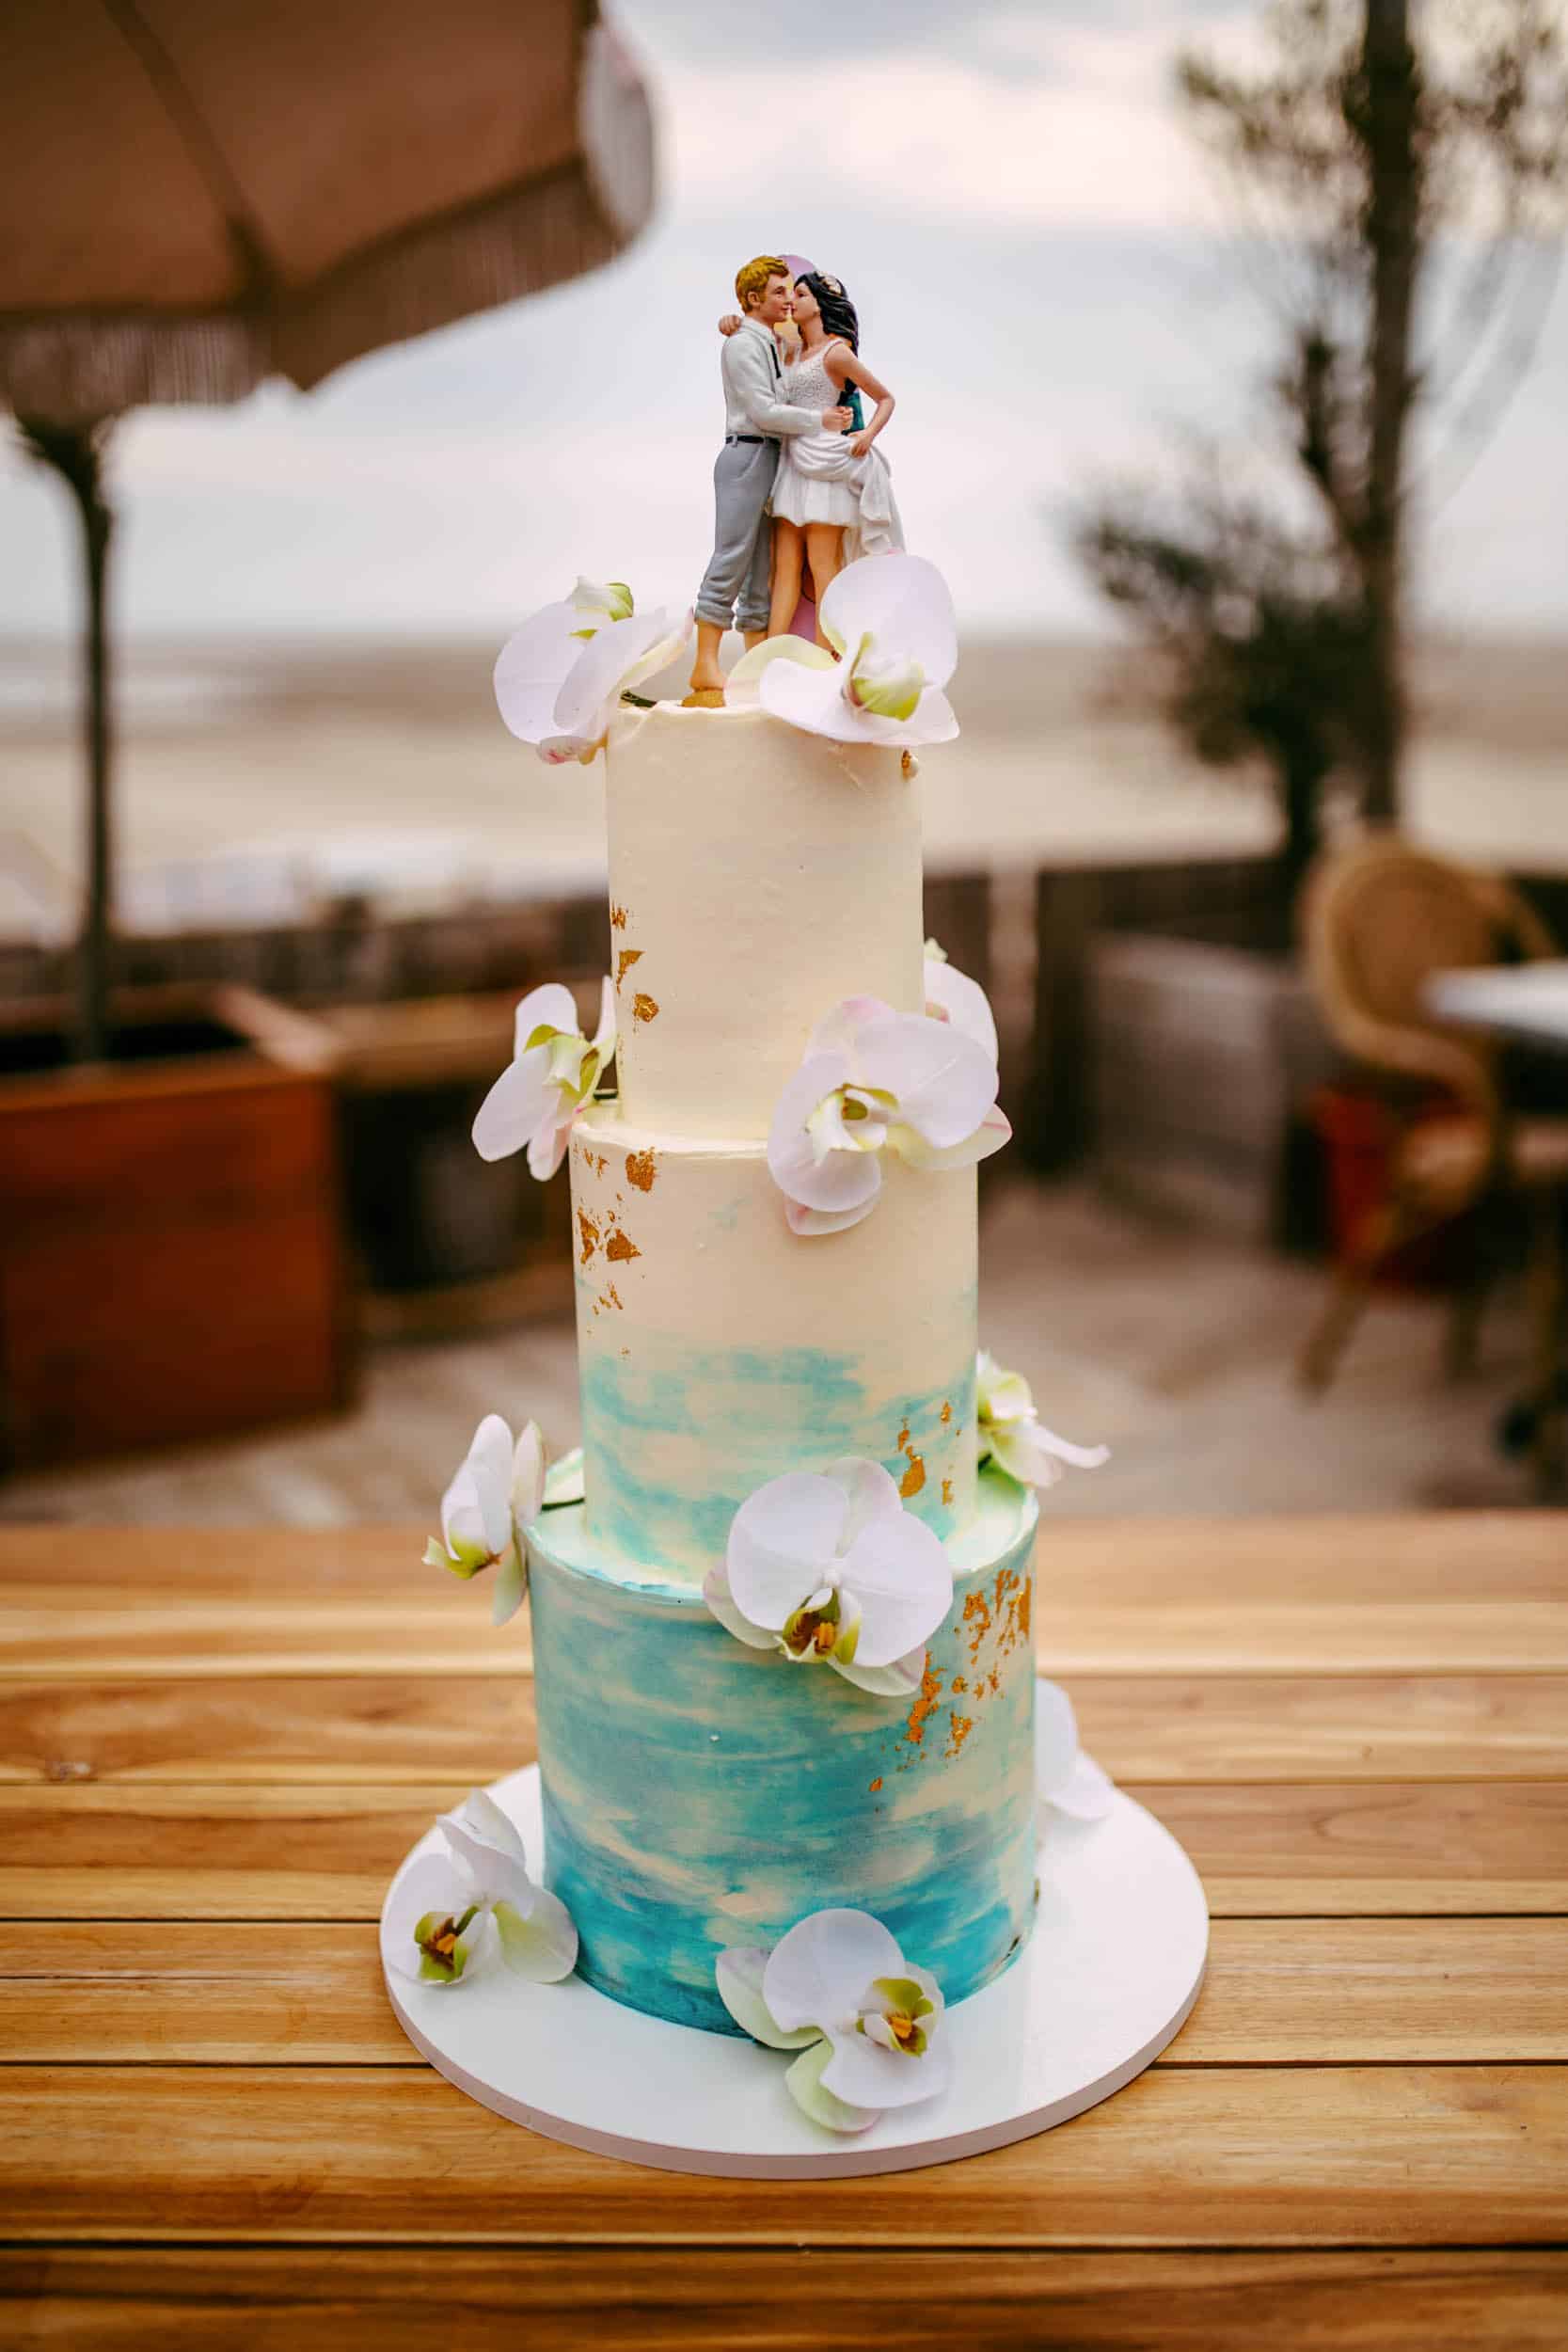 Description: A wedding cake with a couple on it.